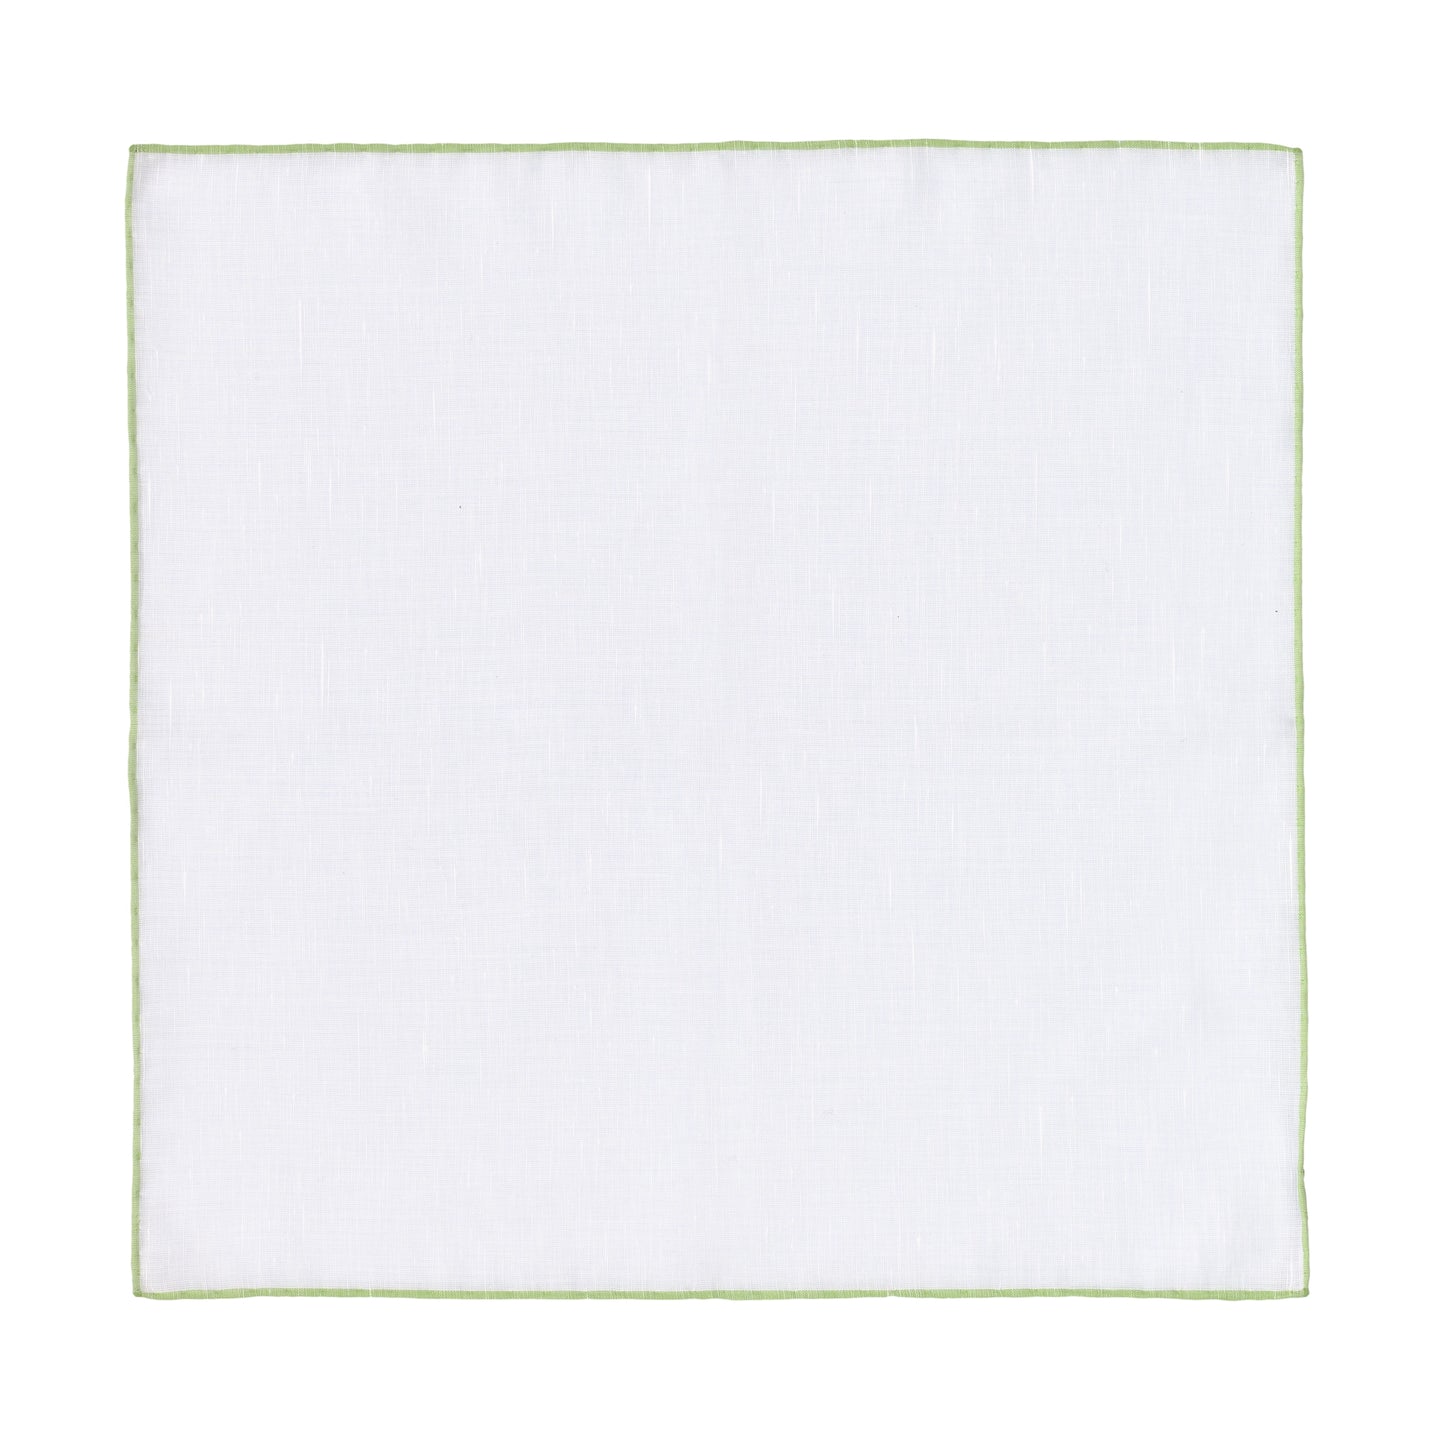 Cotton-Linen Pocket Square in White and Light Green